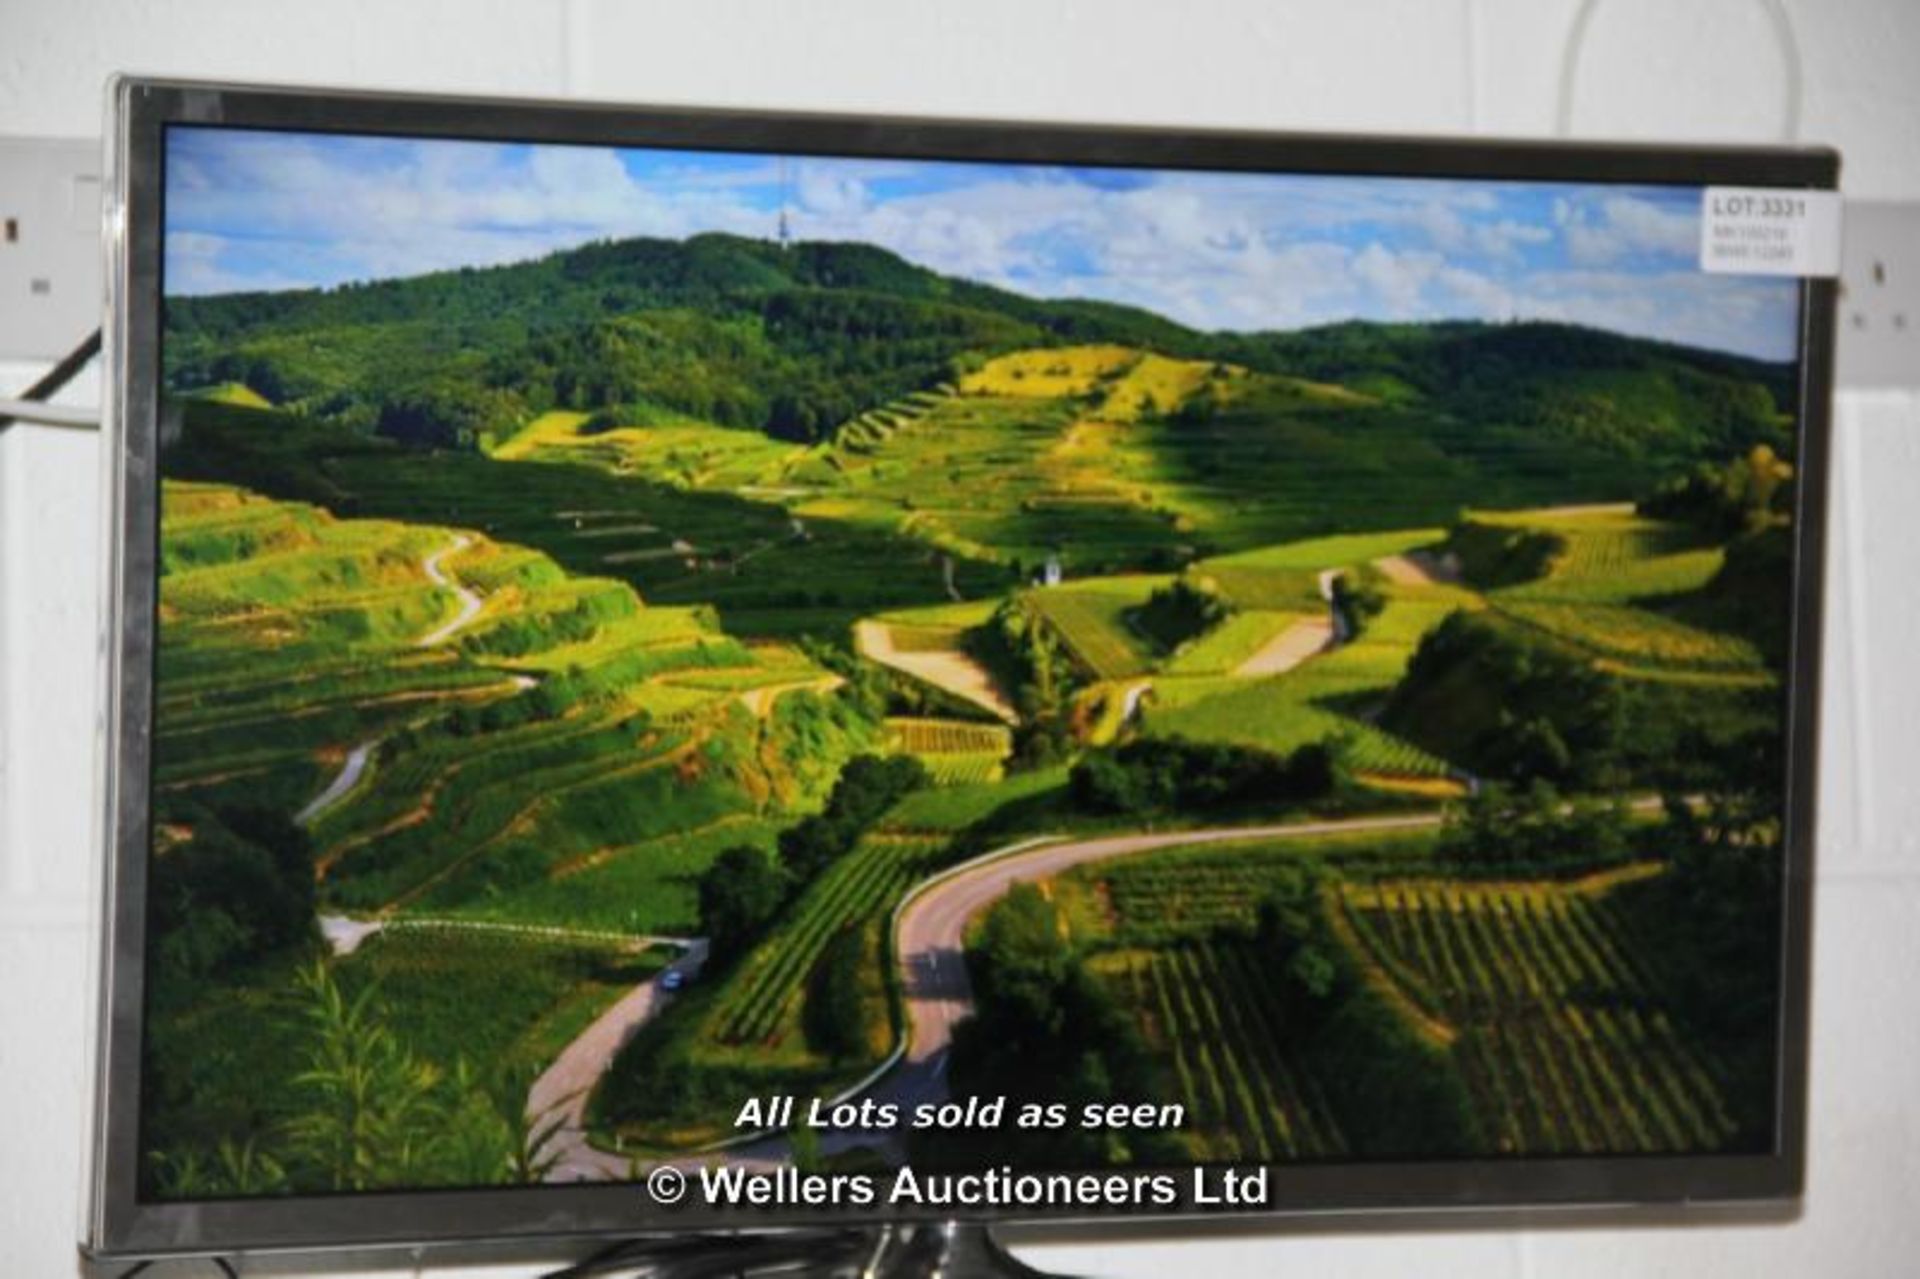 SAMSUNG 48" LED TV / WITH POWER  / WITH PICTURE / MAY CONTAIN COSMETIC IMPERFECTIONS / GRADE: